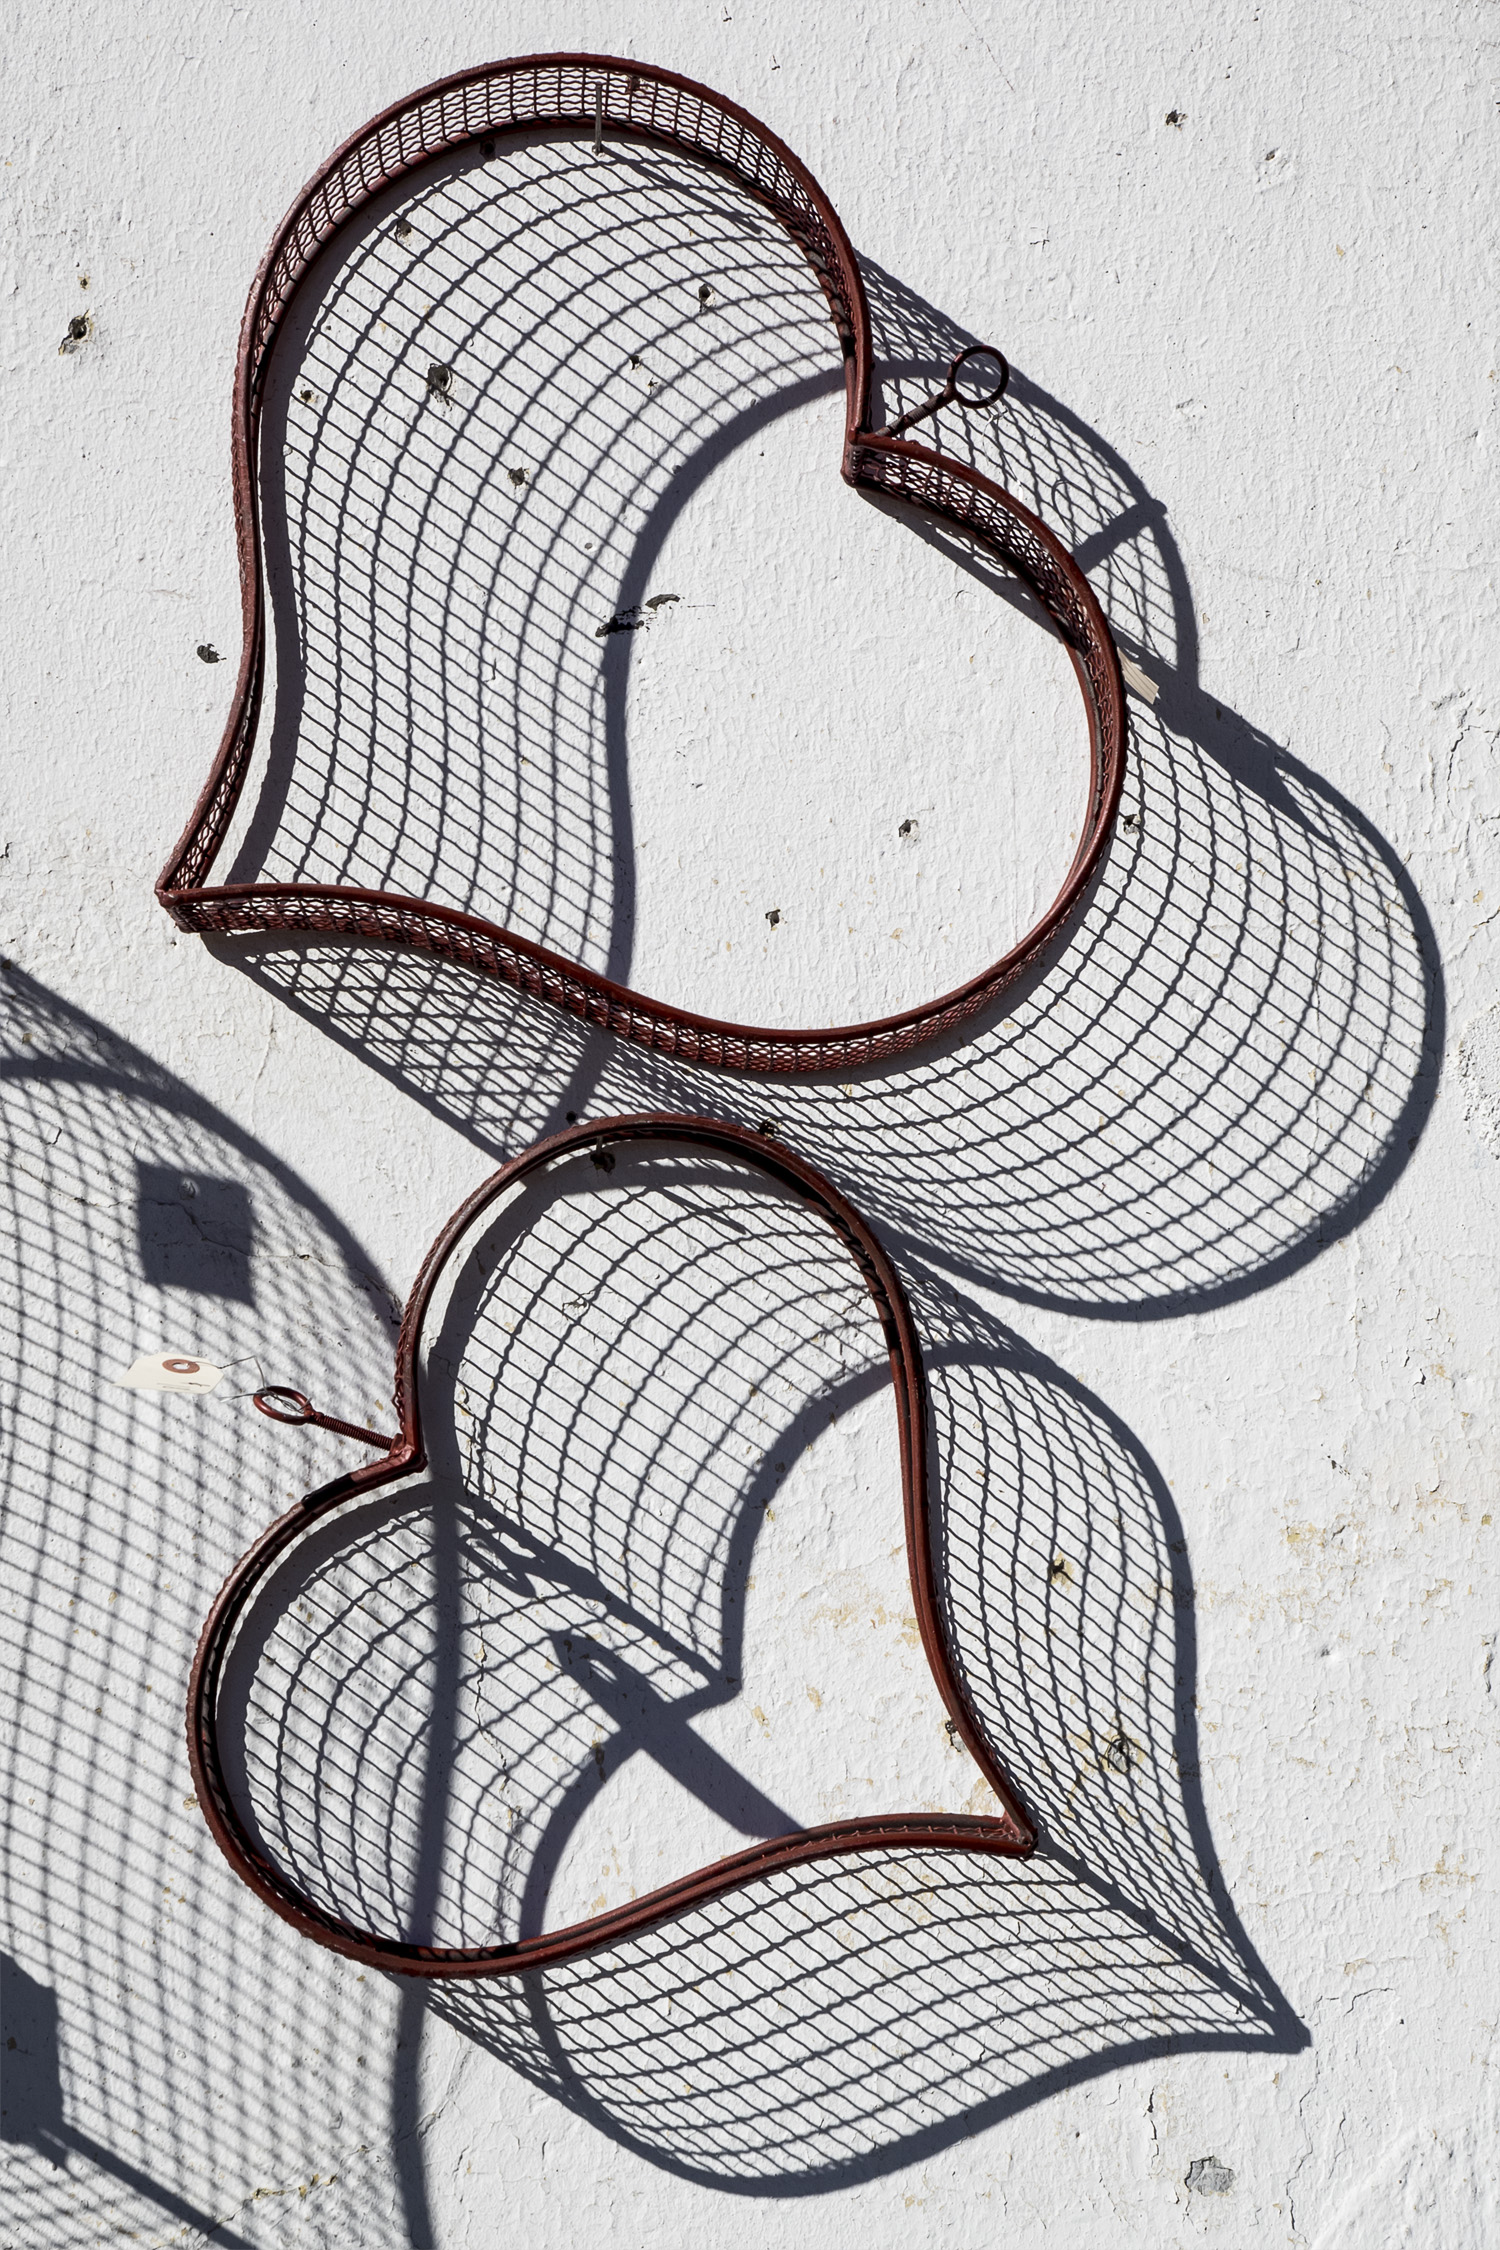 Wirework and Shadows, Bellflower, Amador City